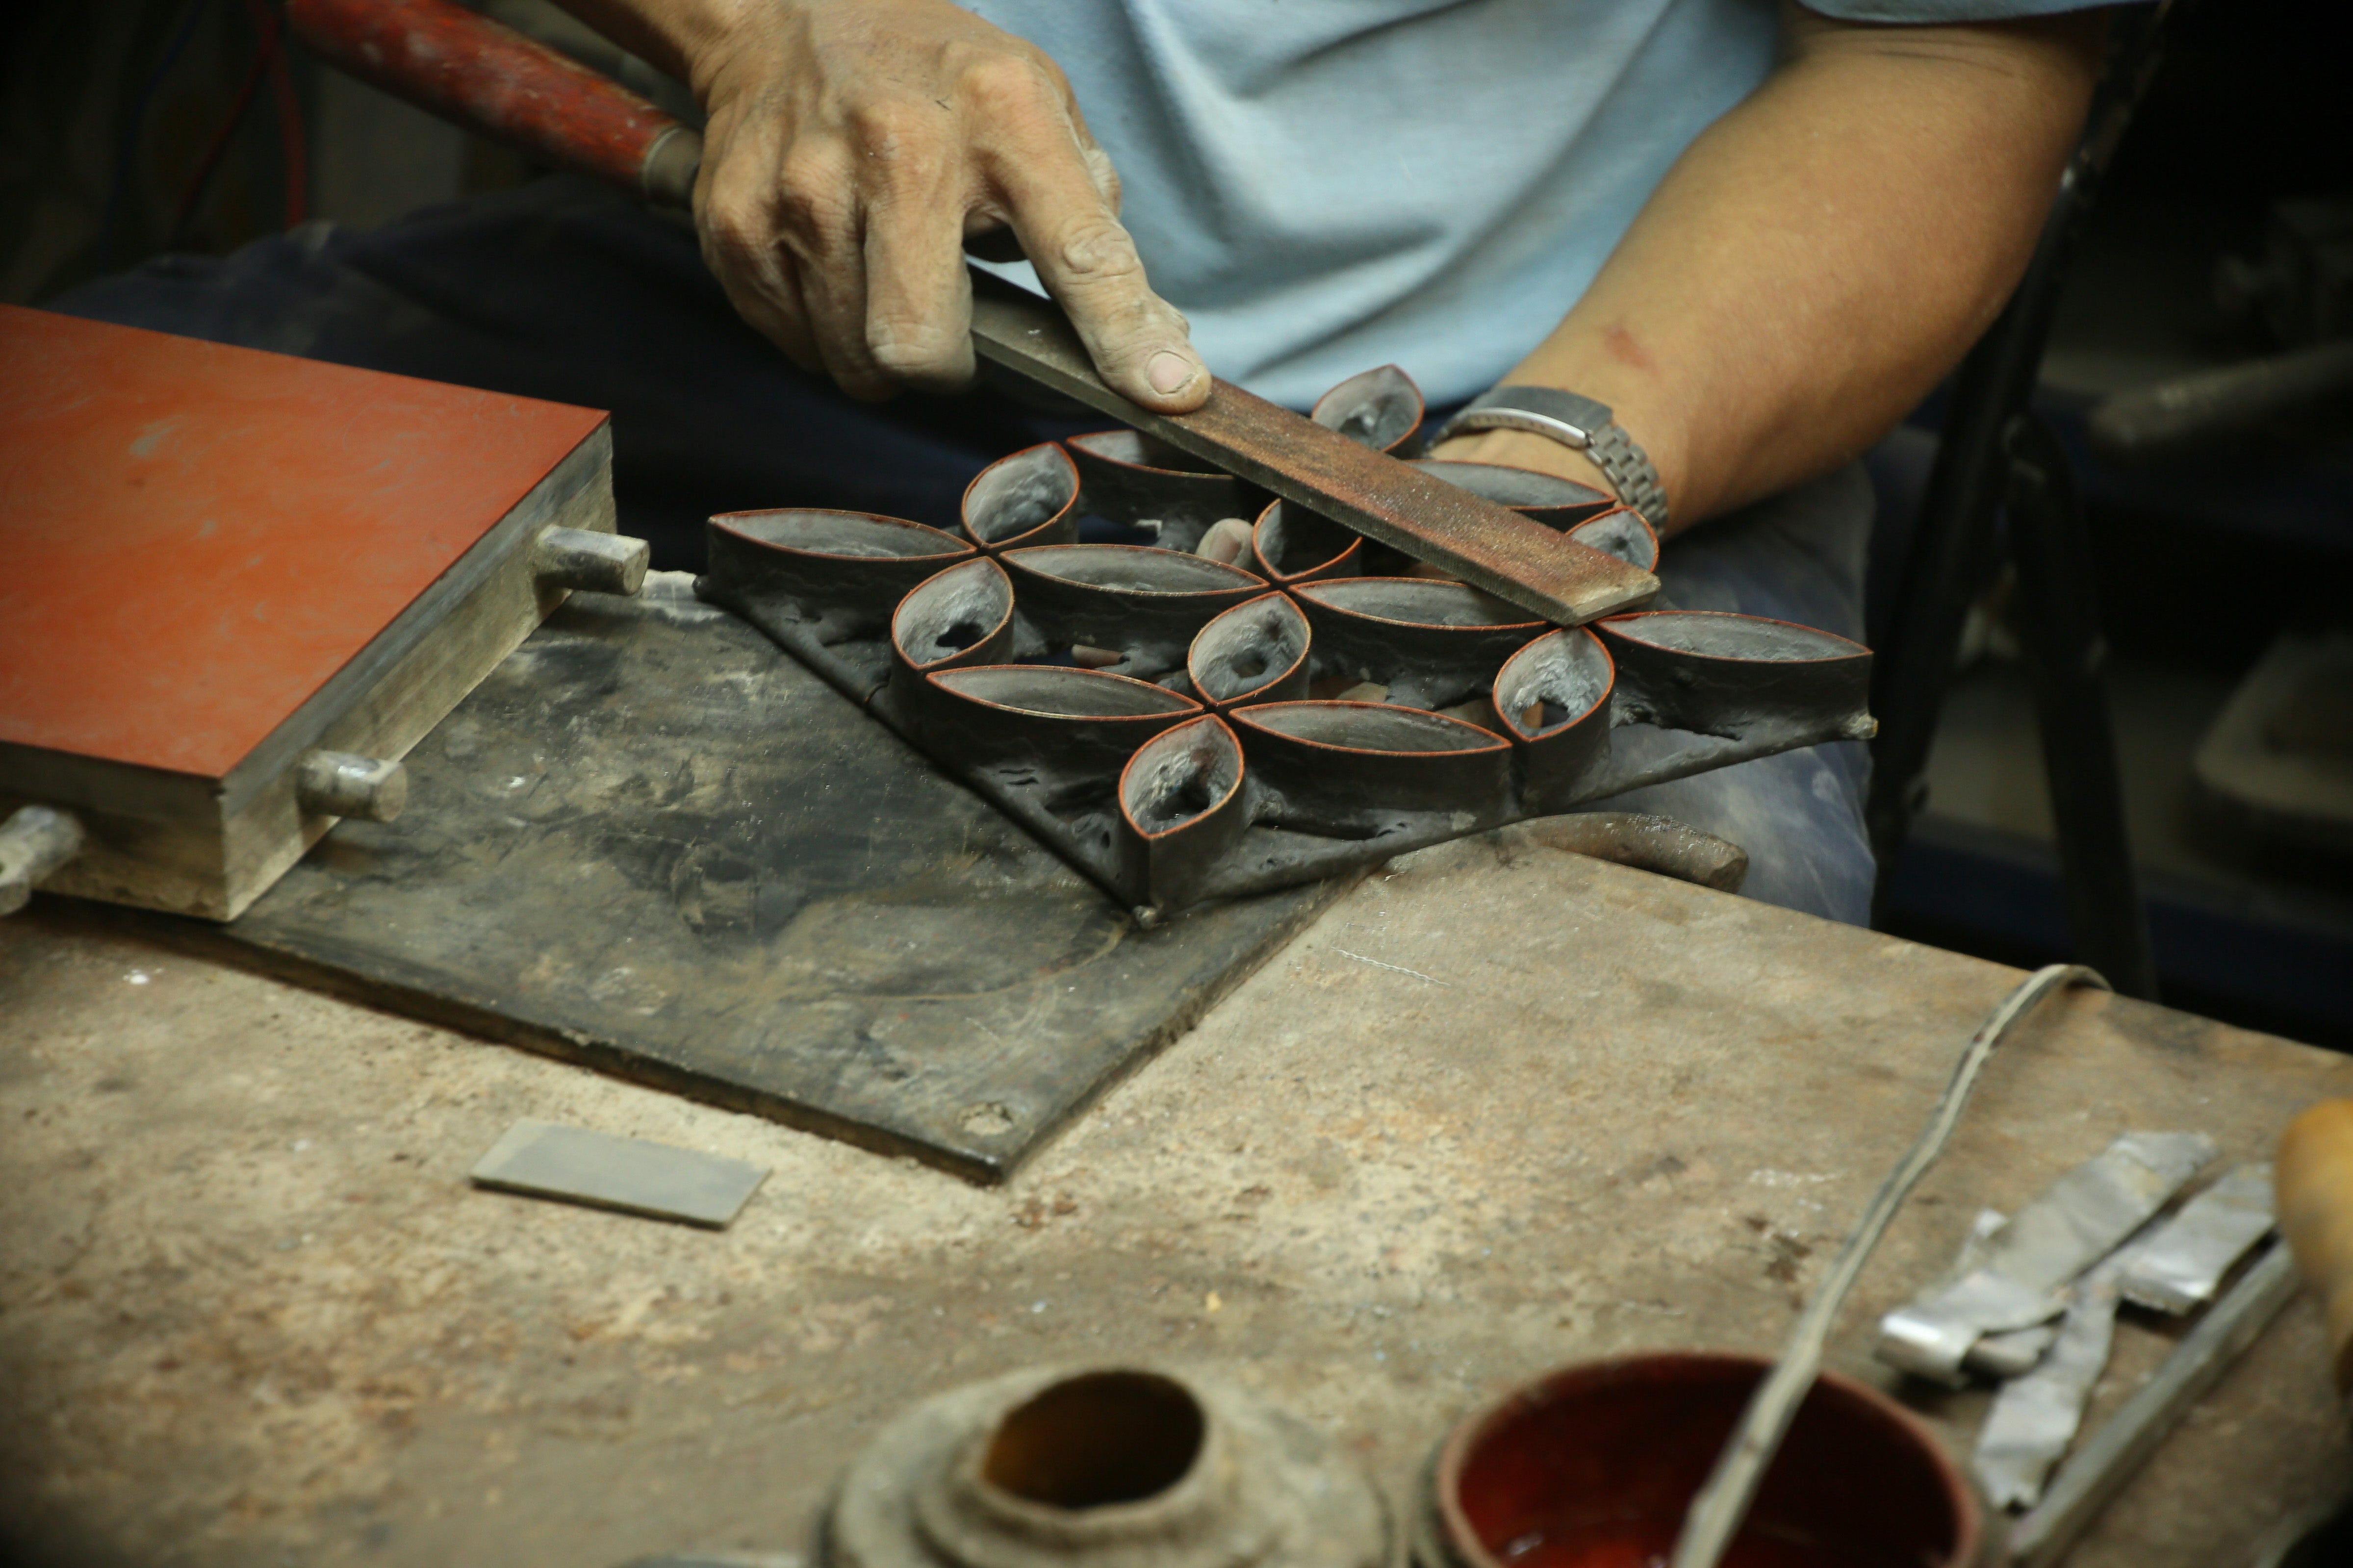 An artisan holds a mold and tools for tile making